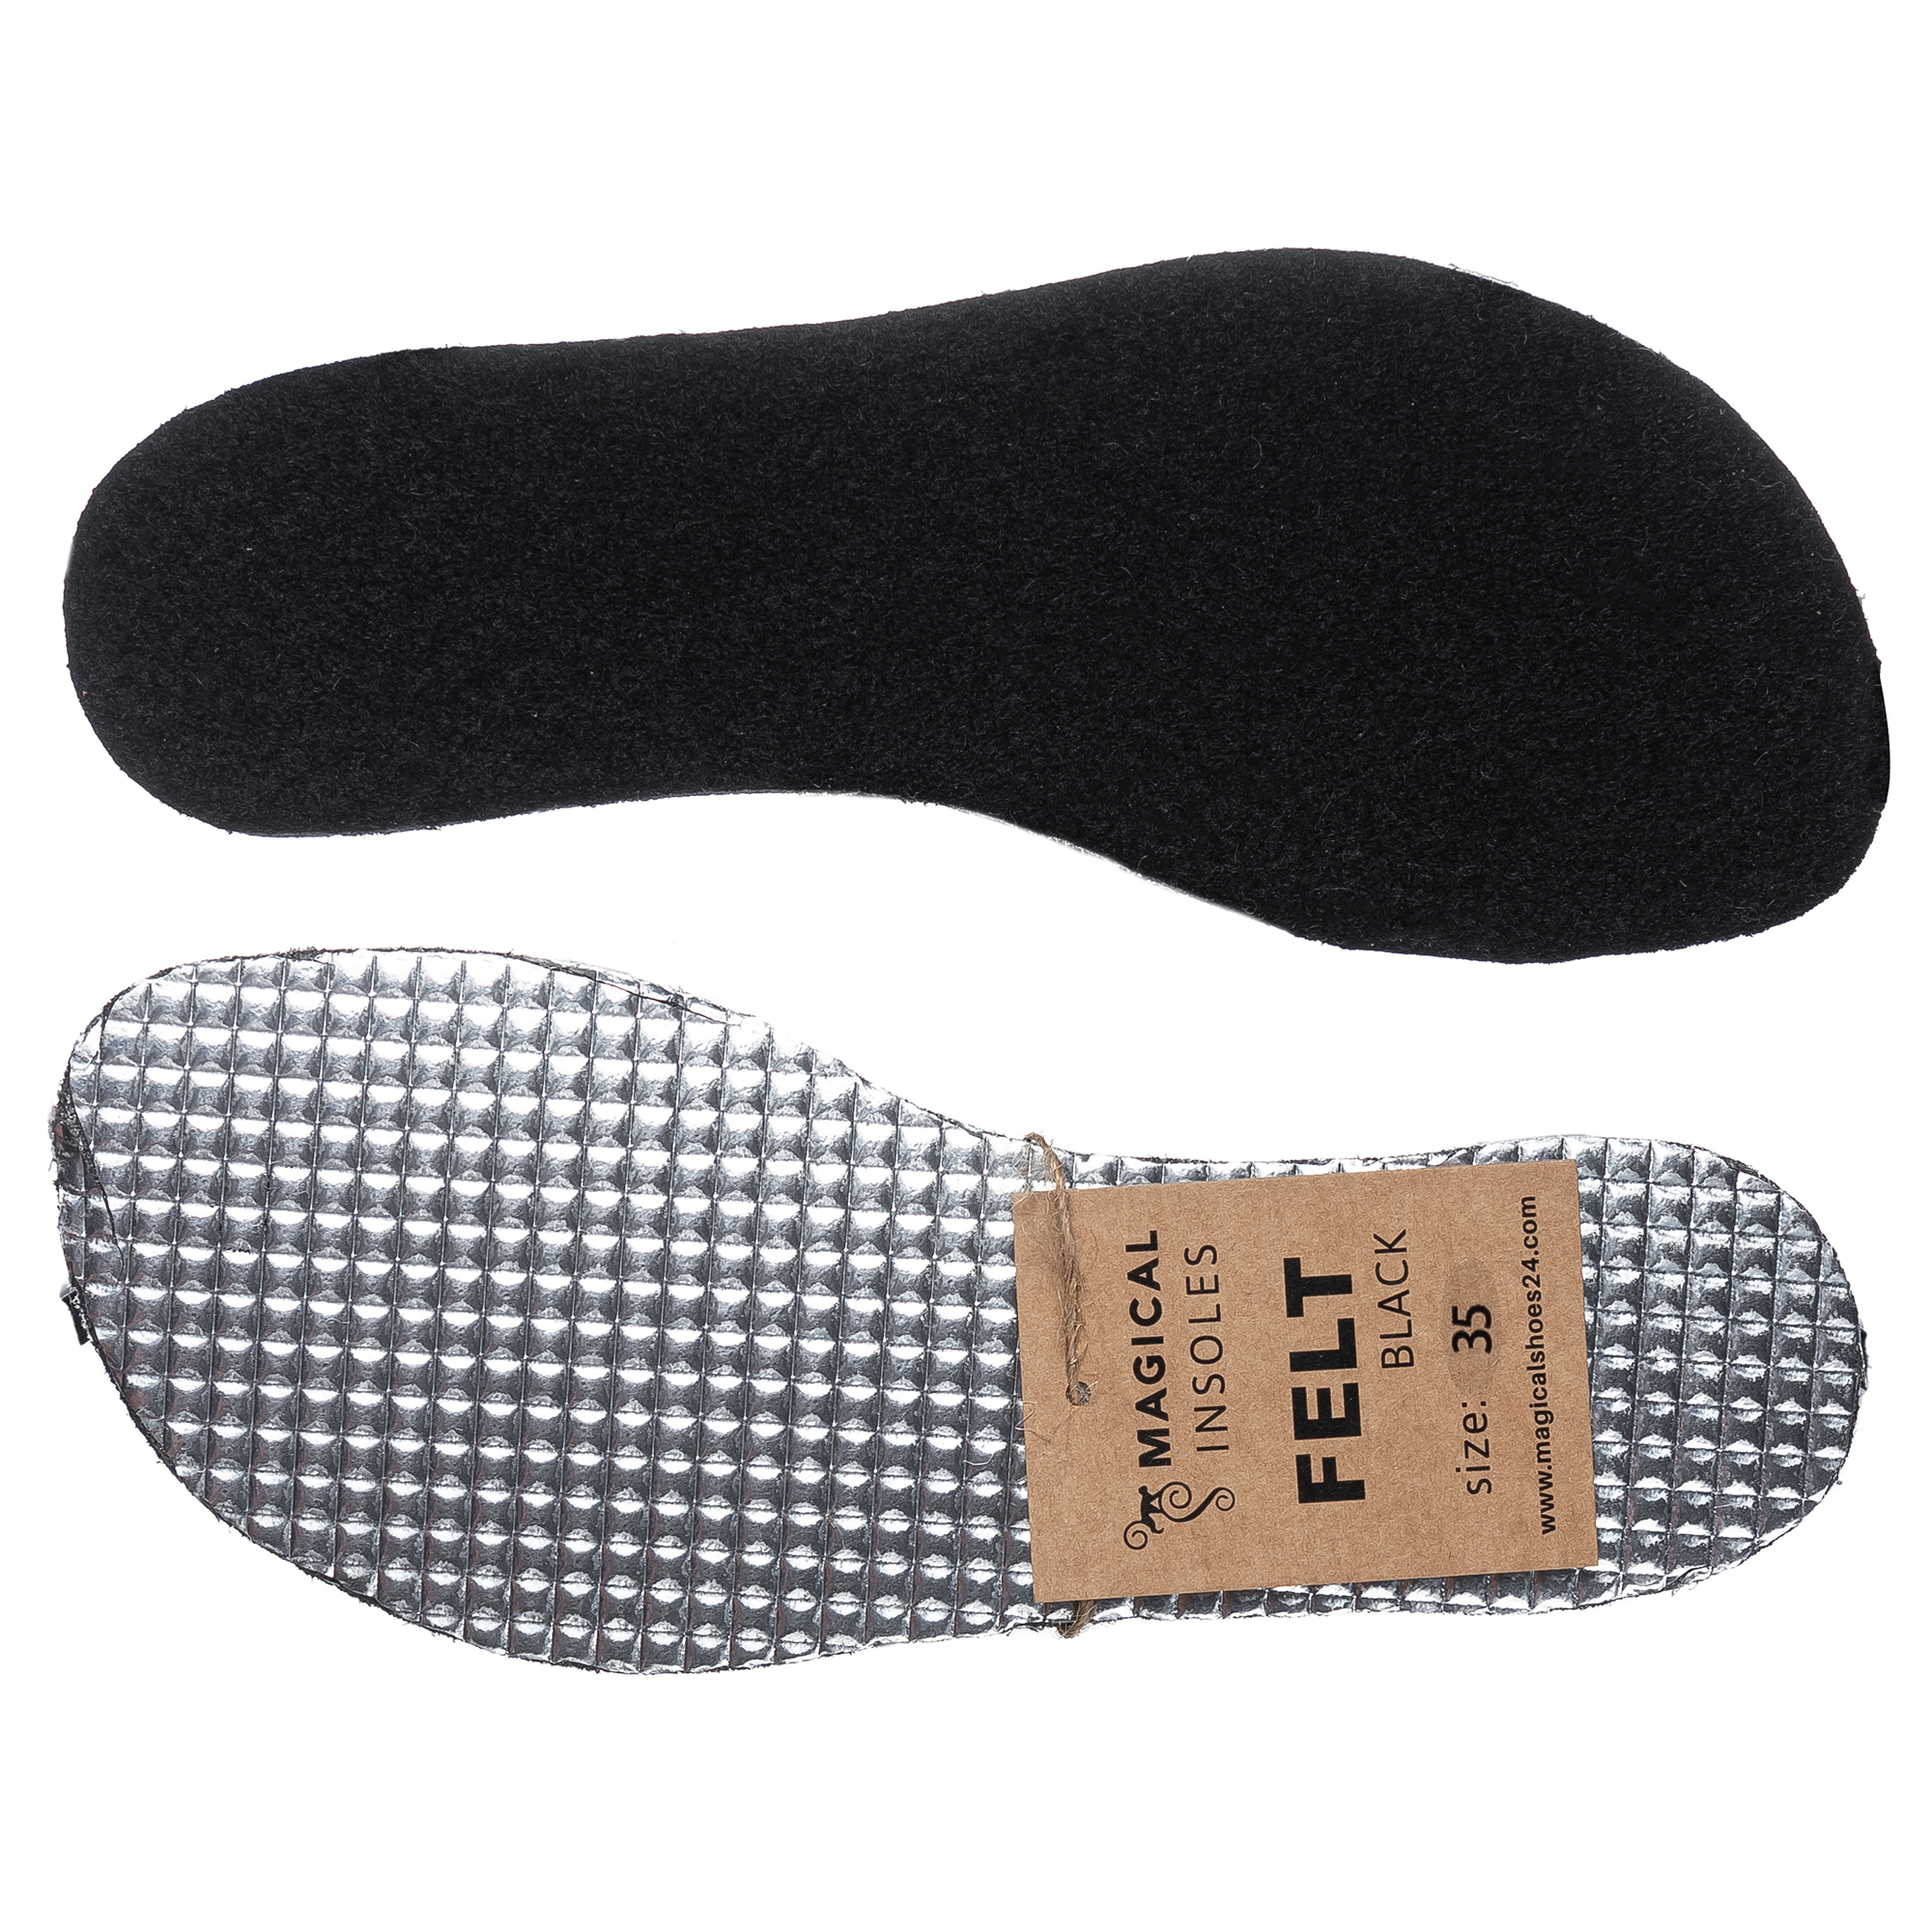 FOIL INSULATED THERMAL WOOL INSOLES WARM SHOES BOOTS Size Men's :7,8,9,10,11,12